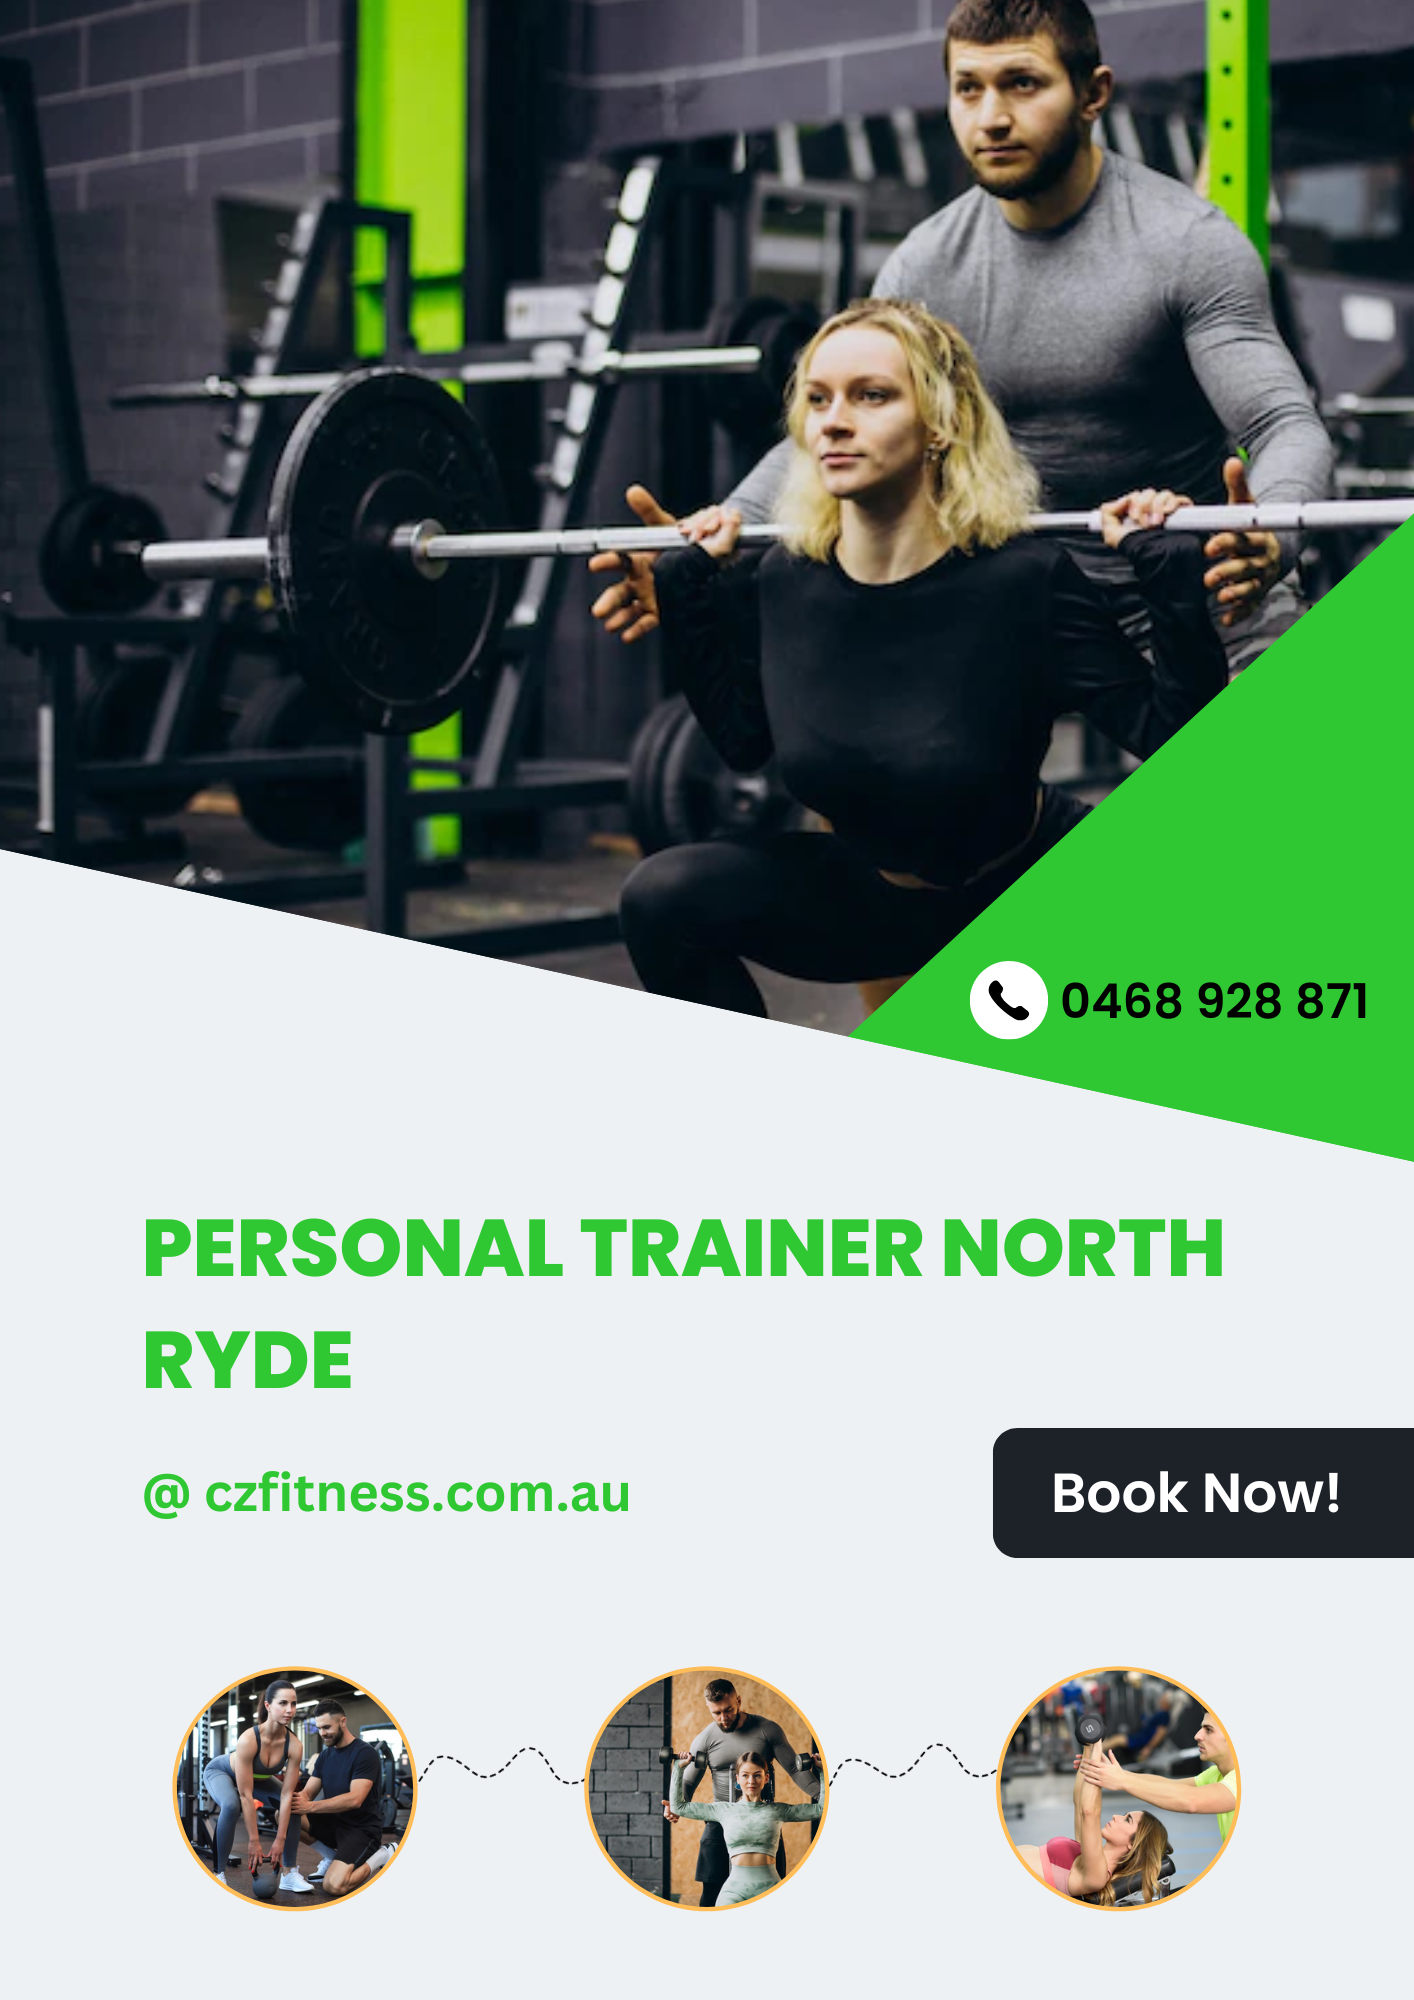 HOW PERSONAL TRAINERS USE THE LATEST TECHNOLOGY TO MOTIVATE CLIENTS?